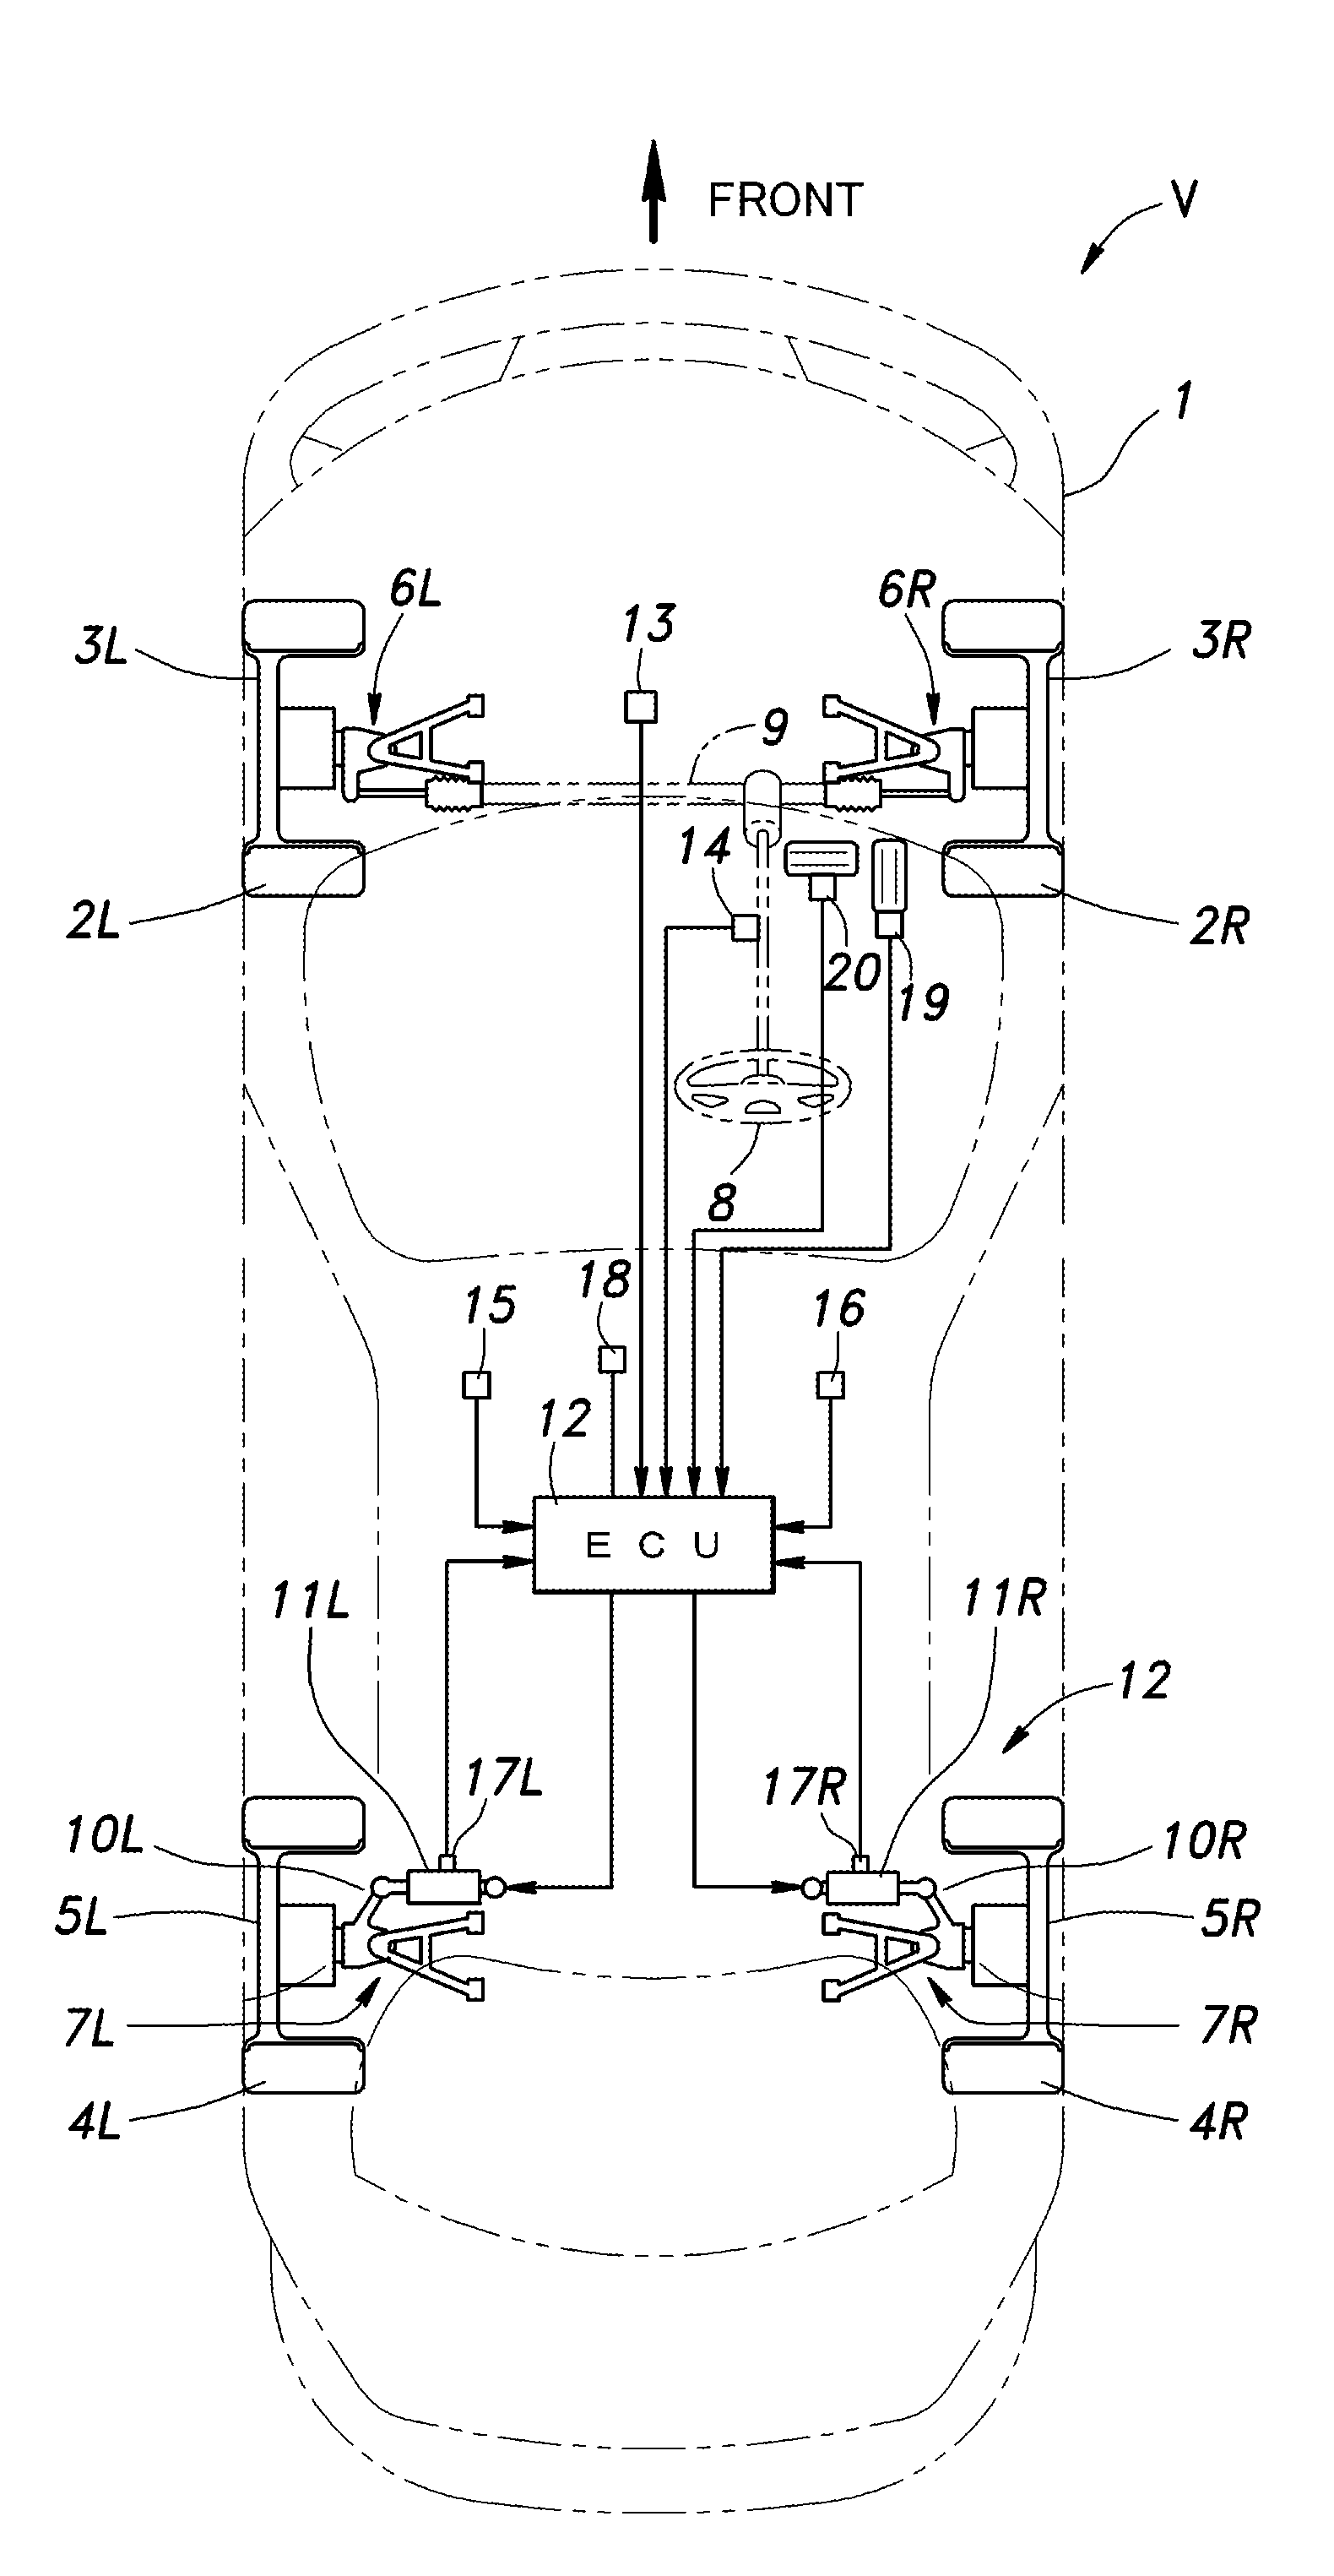 Rear wheel toe angle control system for a vehicle